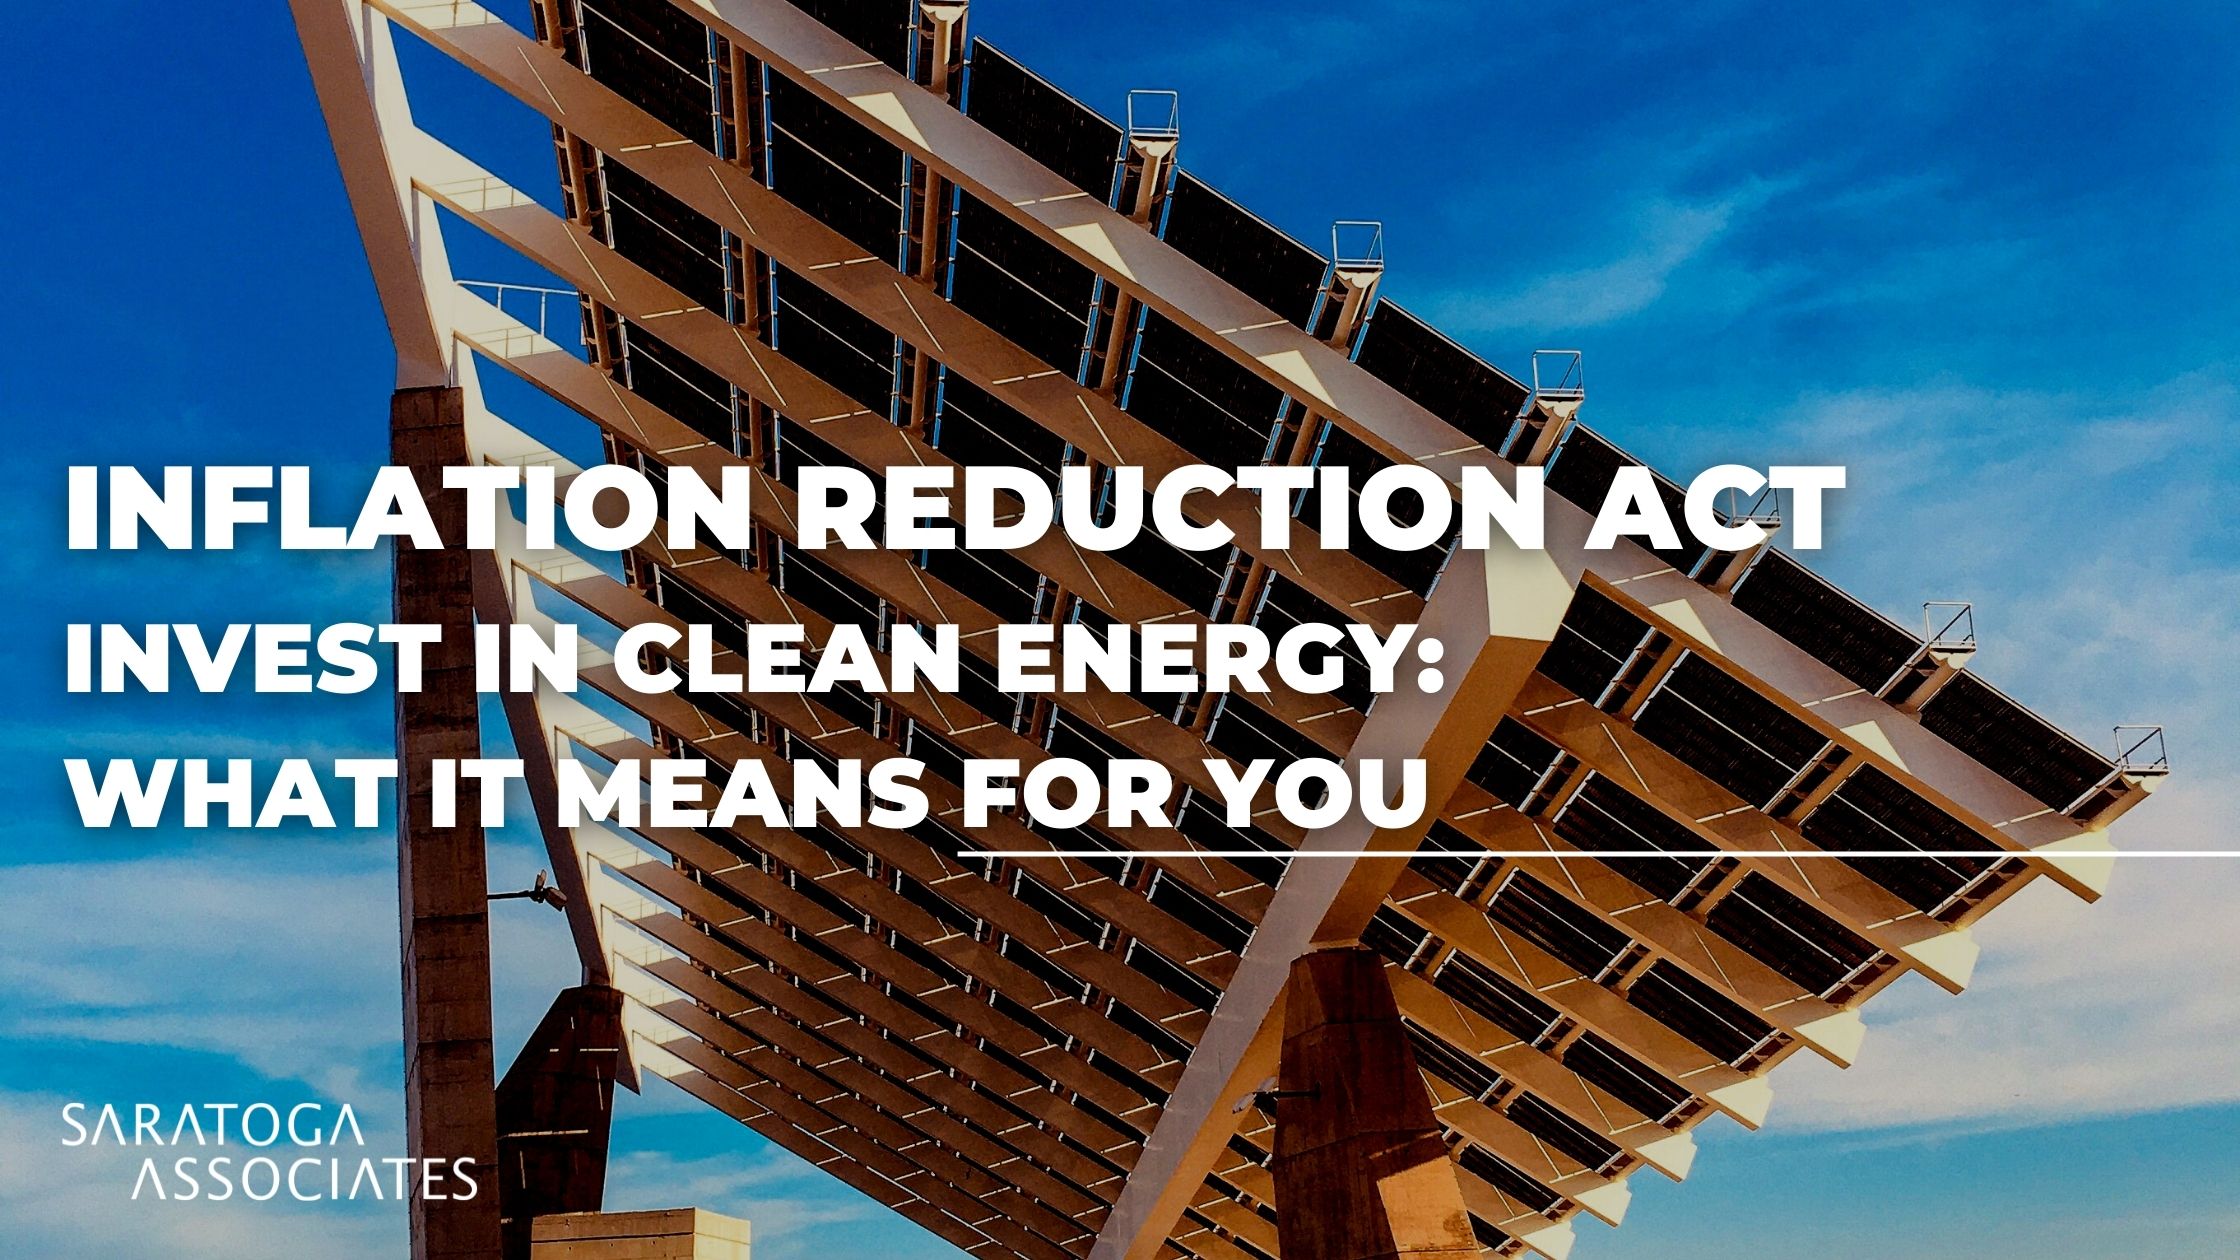 Inflation Reduction Act Invest in Clean Energy – What it means for you